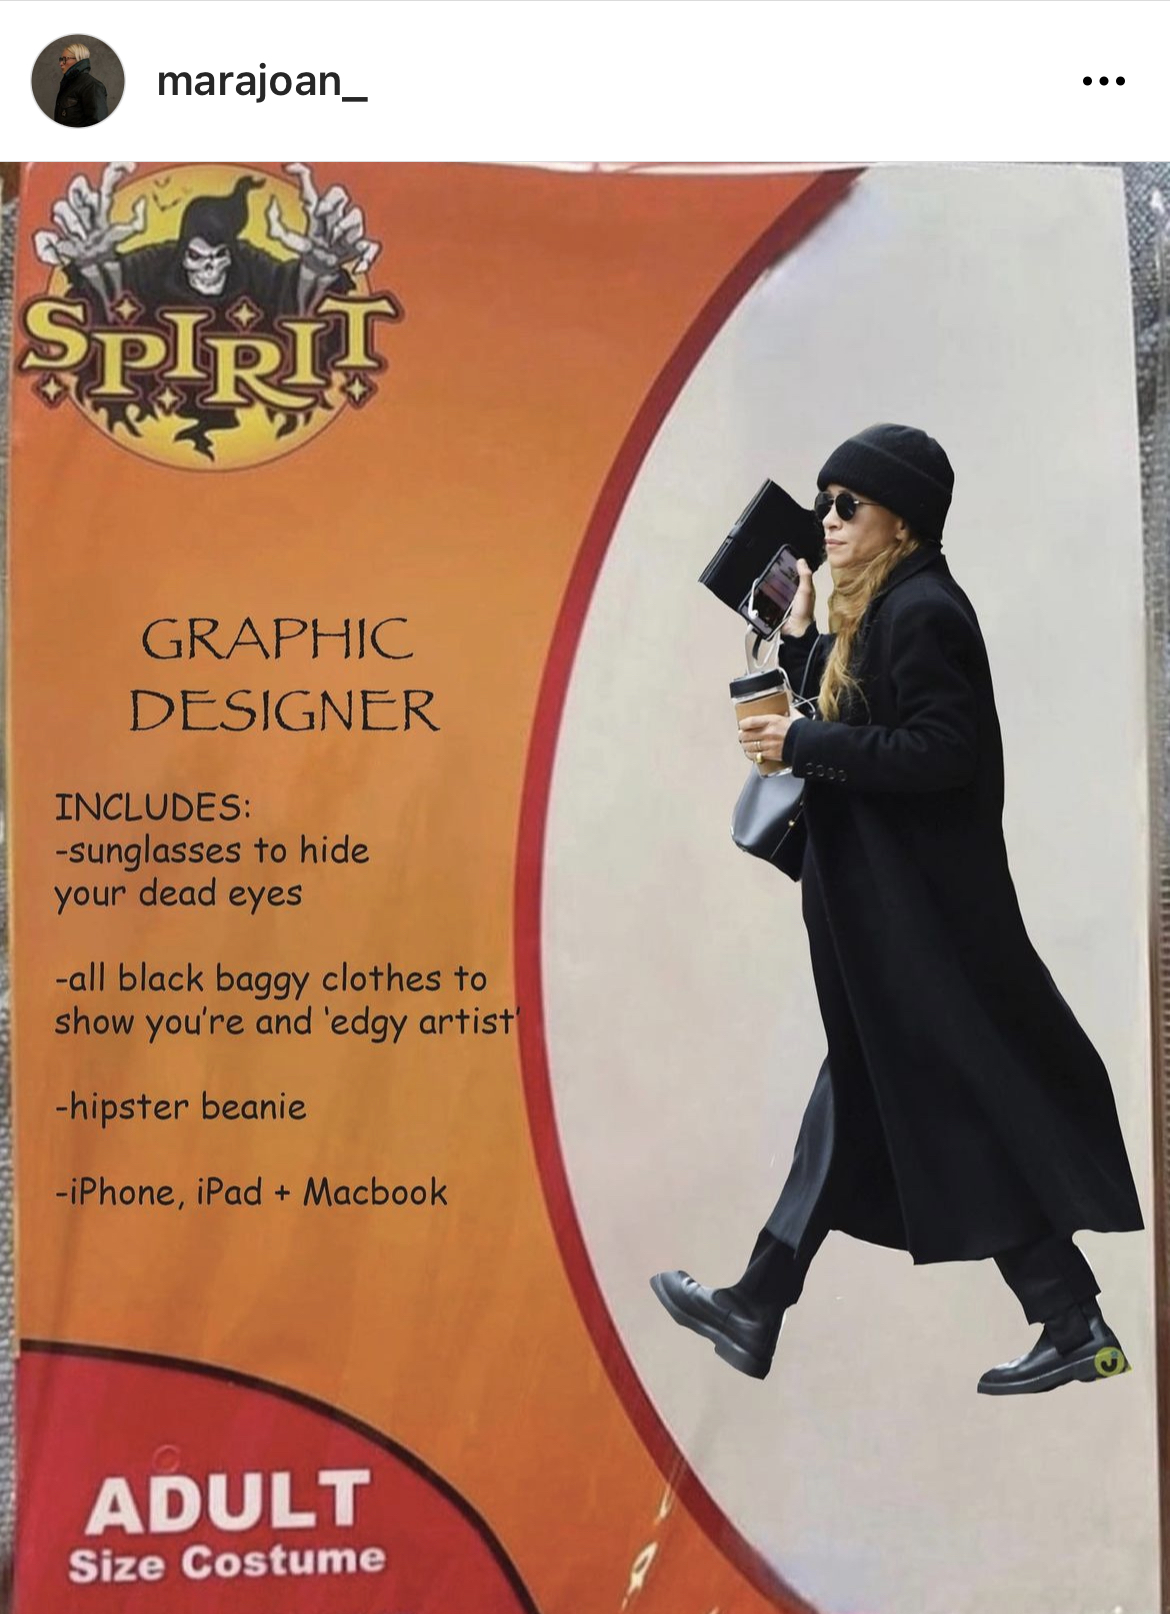 Costume Memes - spirit halloween - marajoan_ Spirii Graphic Designer Includes sunglasses to hide your dead eyes all black baggy clothes to show you're and 'edgy artist hipster beanie iPhone, iPad Macbook Adult Size Costume